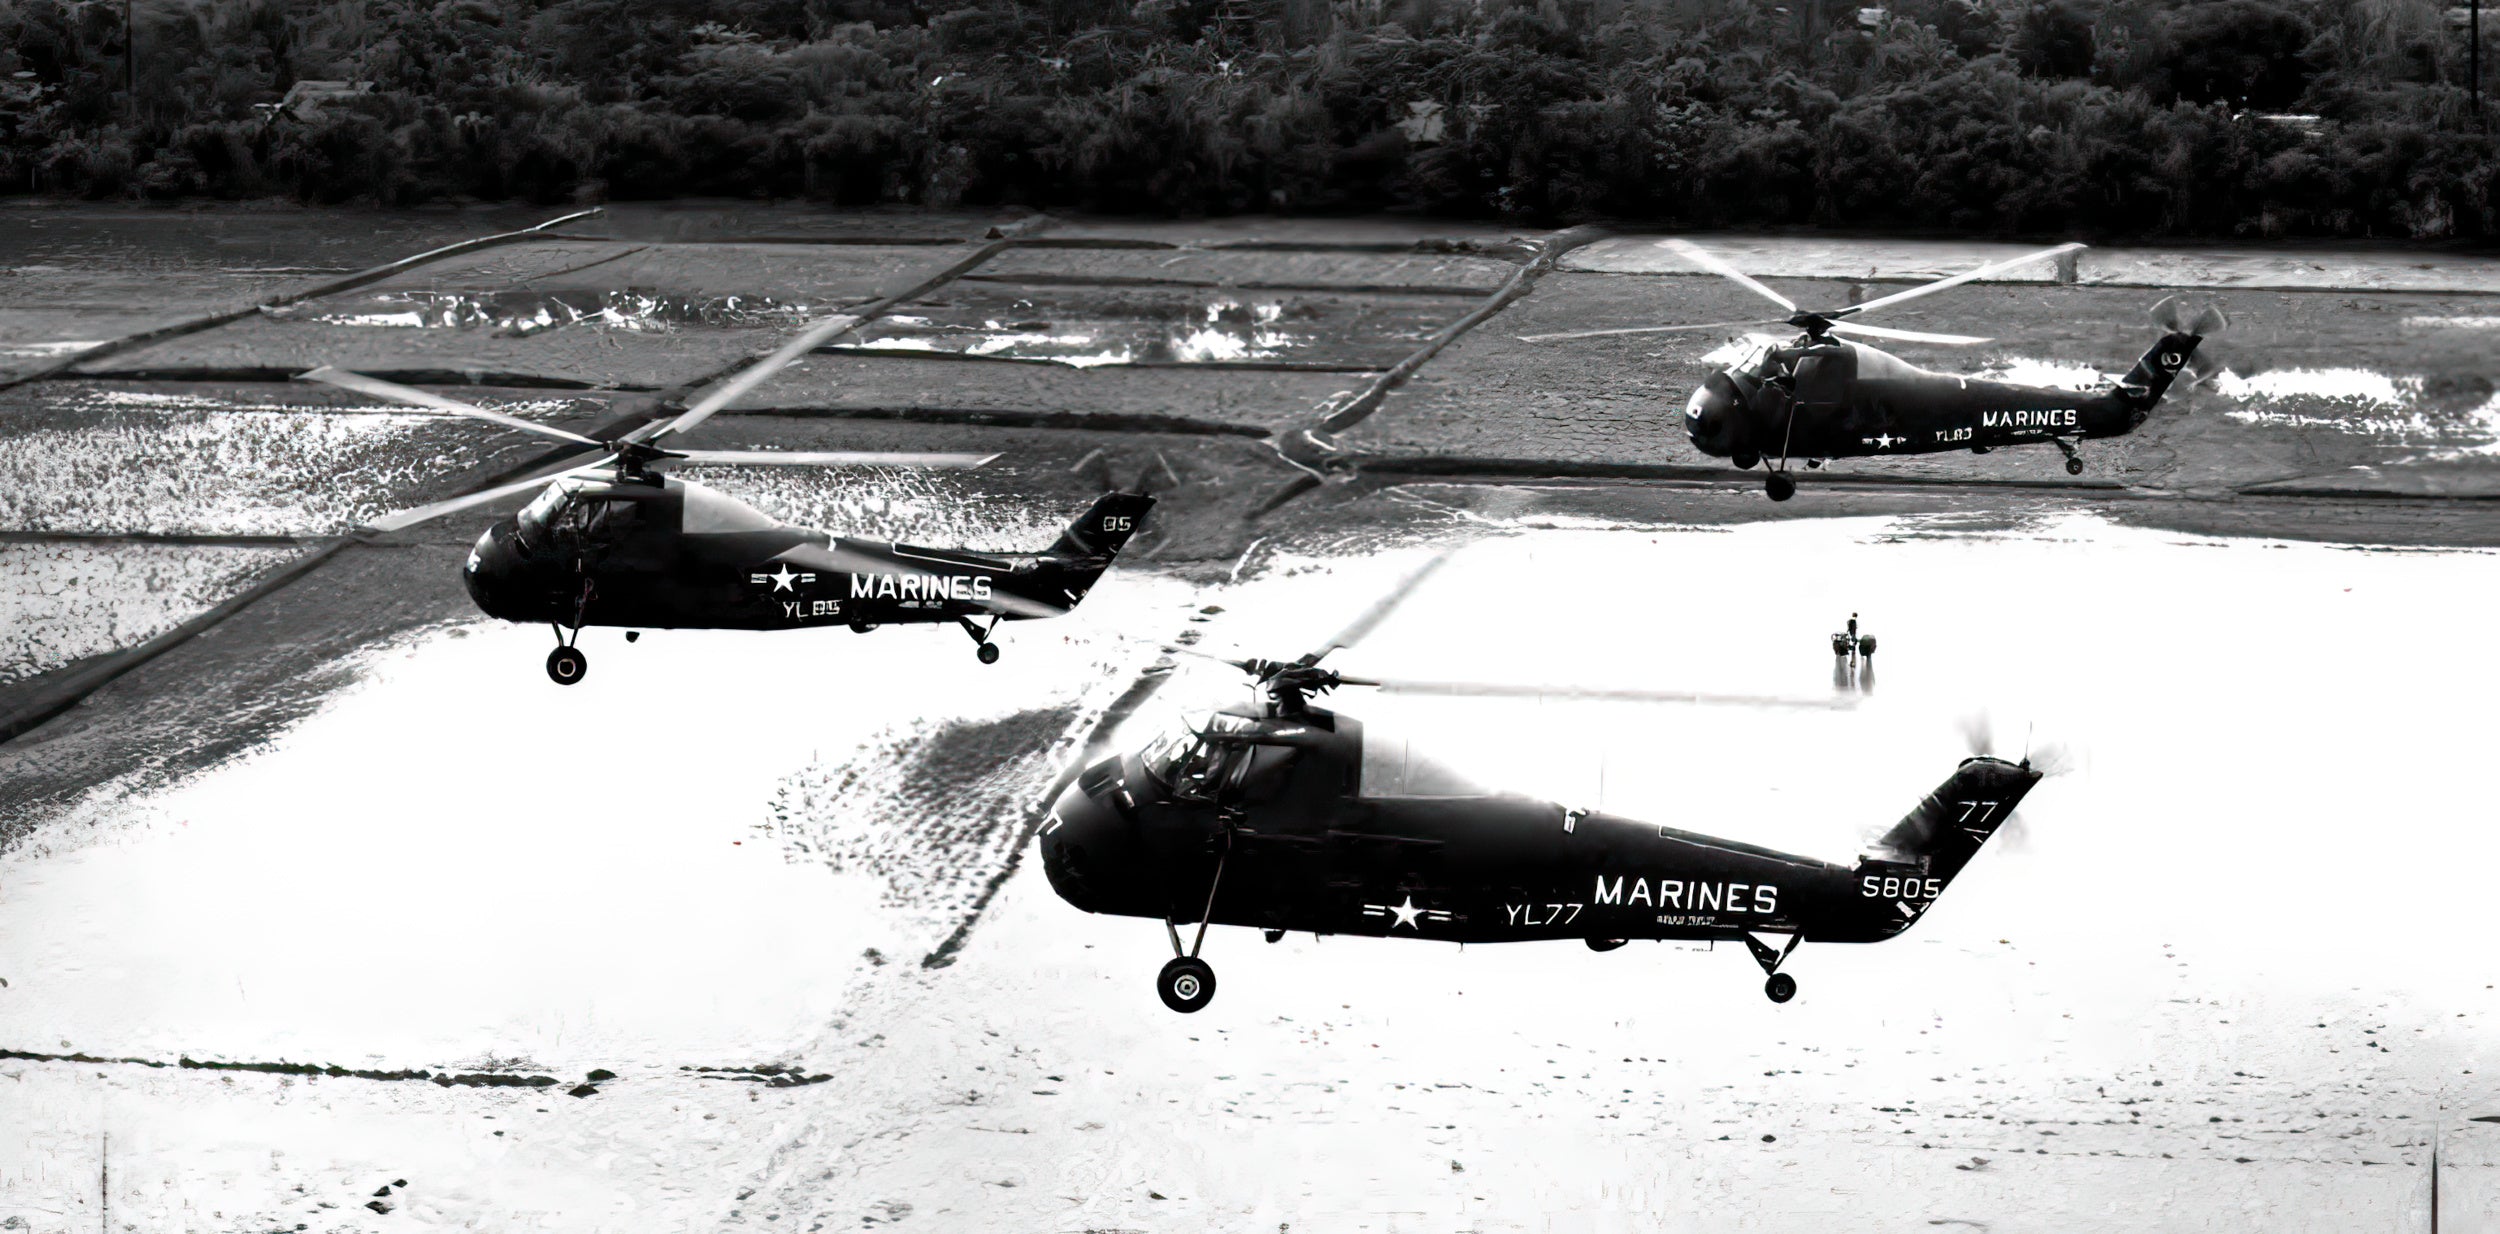 The Path to War: U.S. Marine Corps Operations in Southeast Asia, 1961 to 1965 (Free PDF Book) - Image of Marine Choppers Over Vietnam